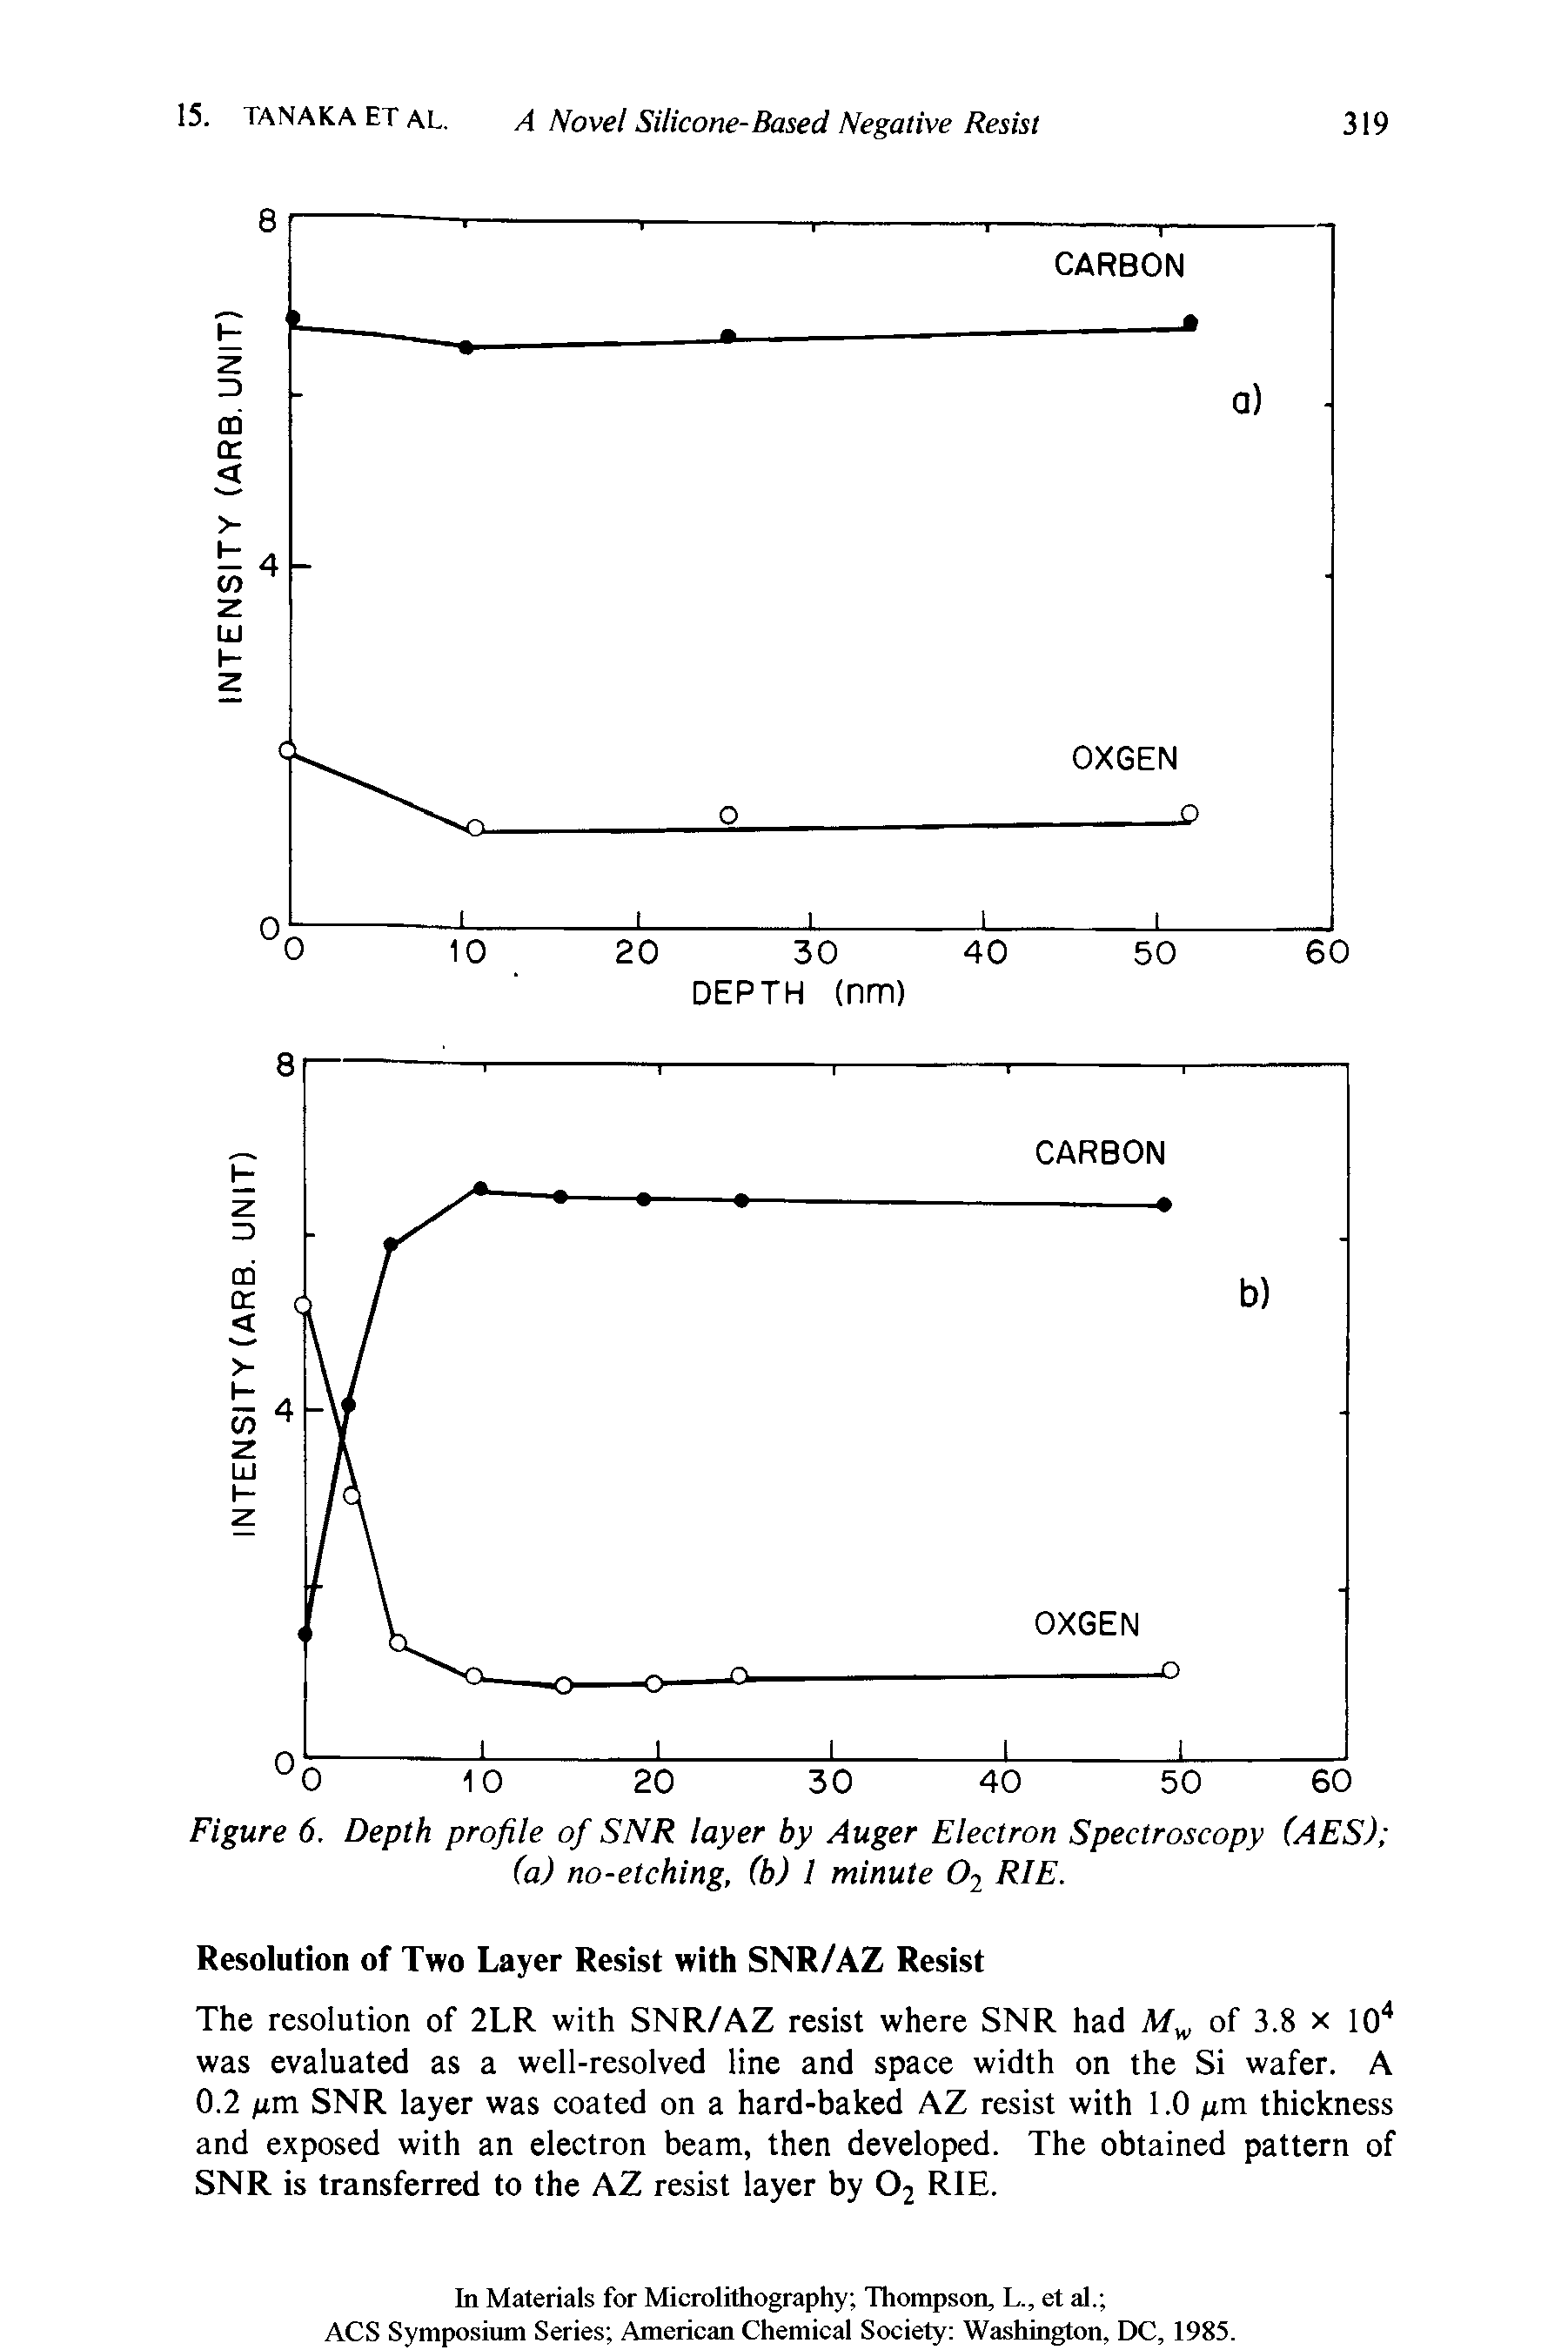 Figure 6. Depth profile of SNR layer by Auger Electron Spectroscopy (AES) (a) no-etching, (b) 1 minute 02 RIE.